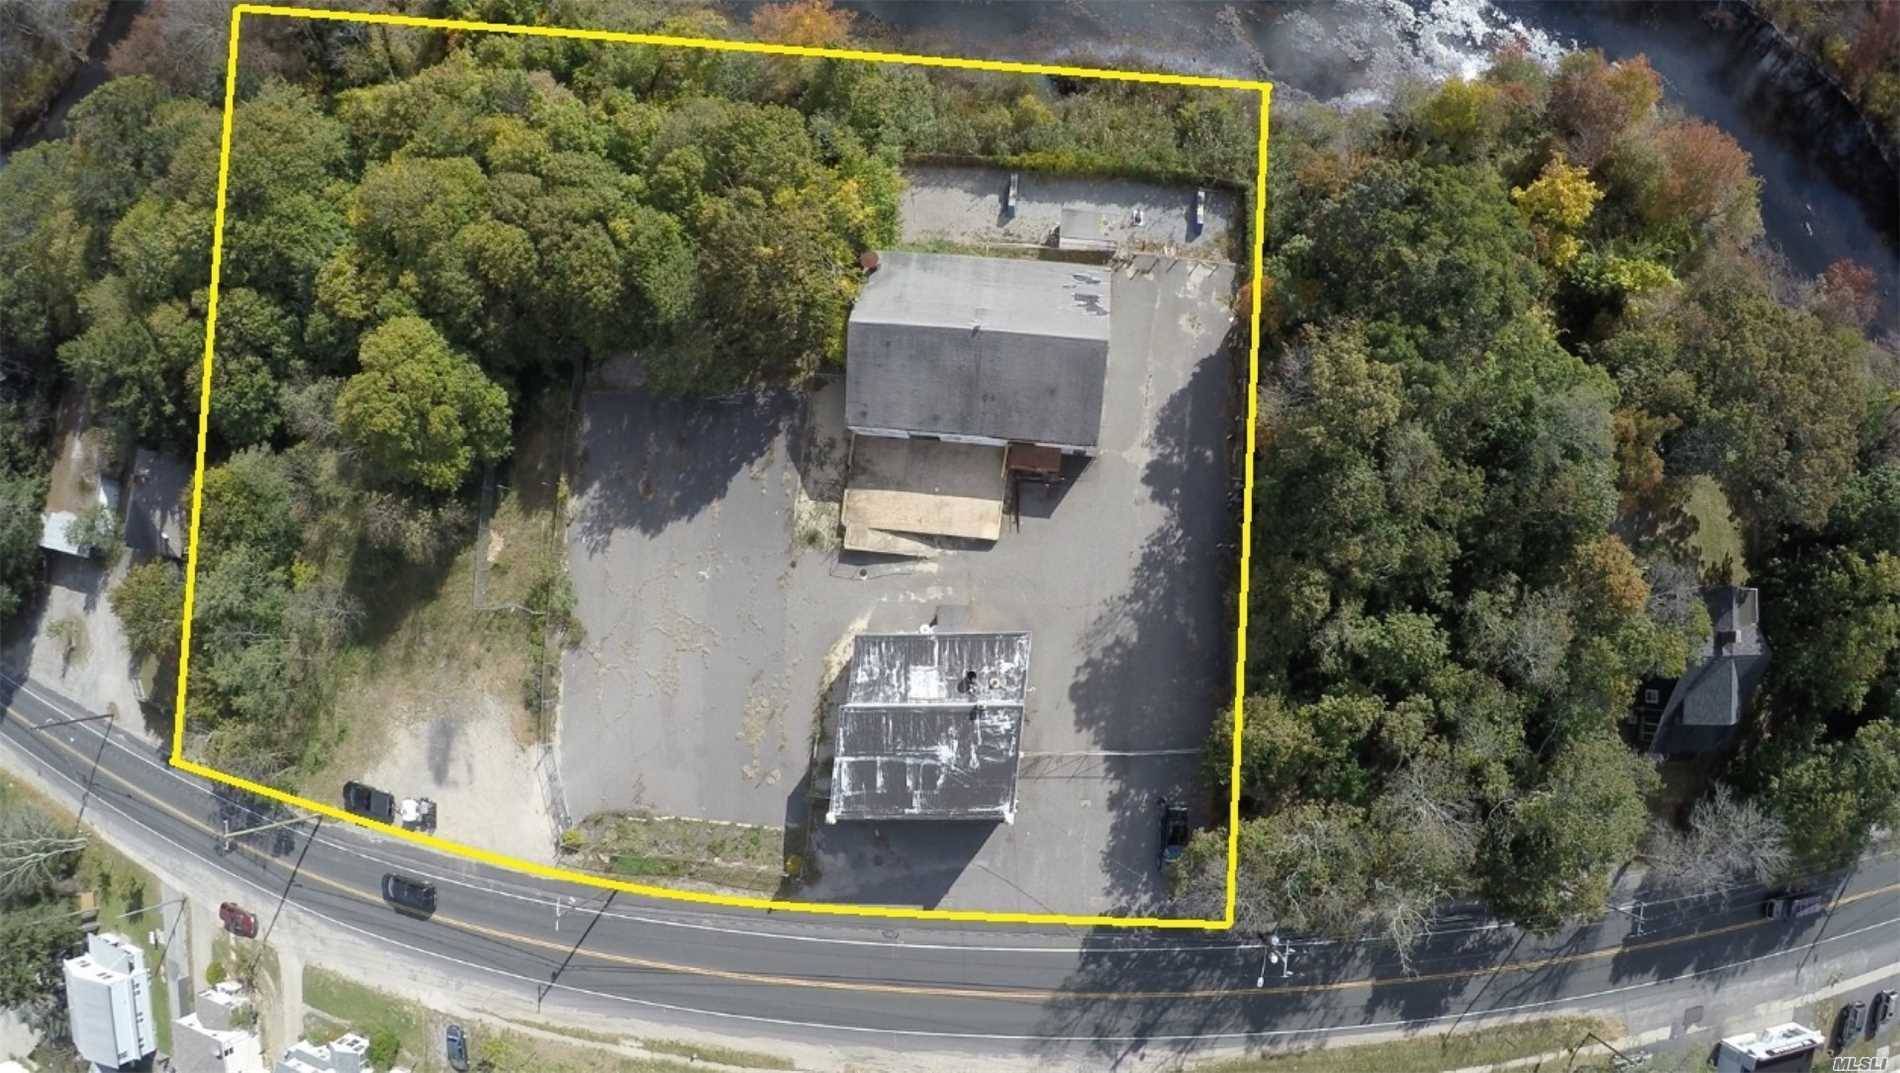 Waterfront Commercial Re-Development Site Comprised Of 2 Parcels Totaling 1.